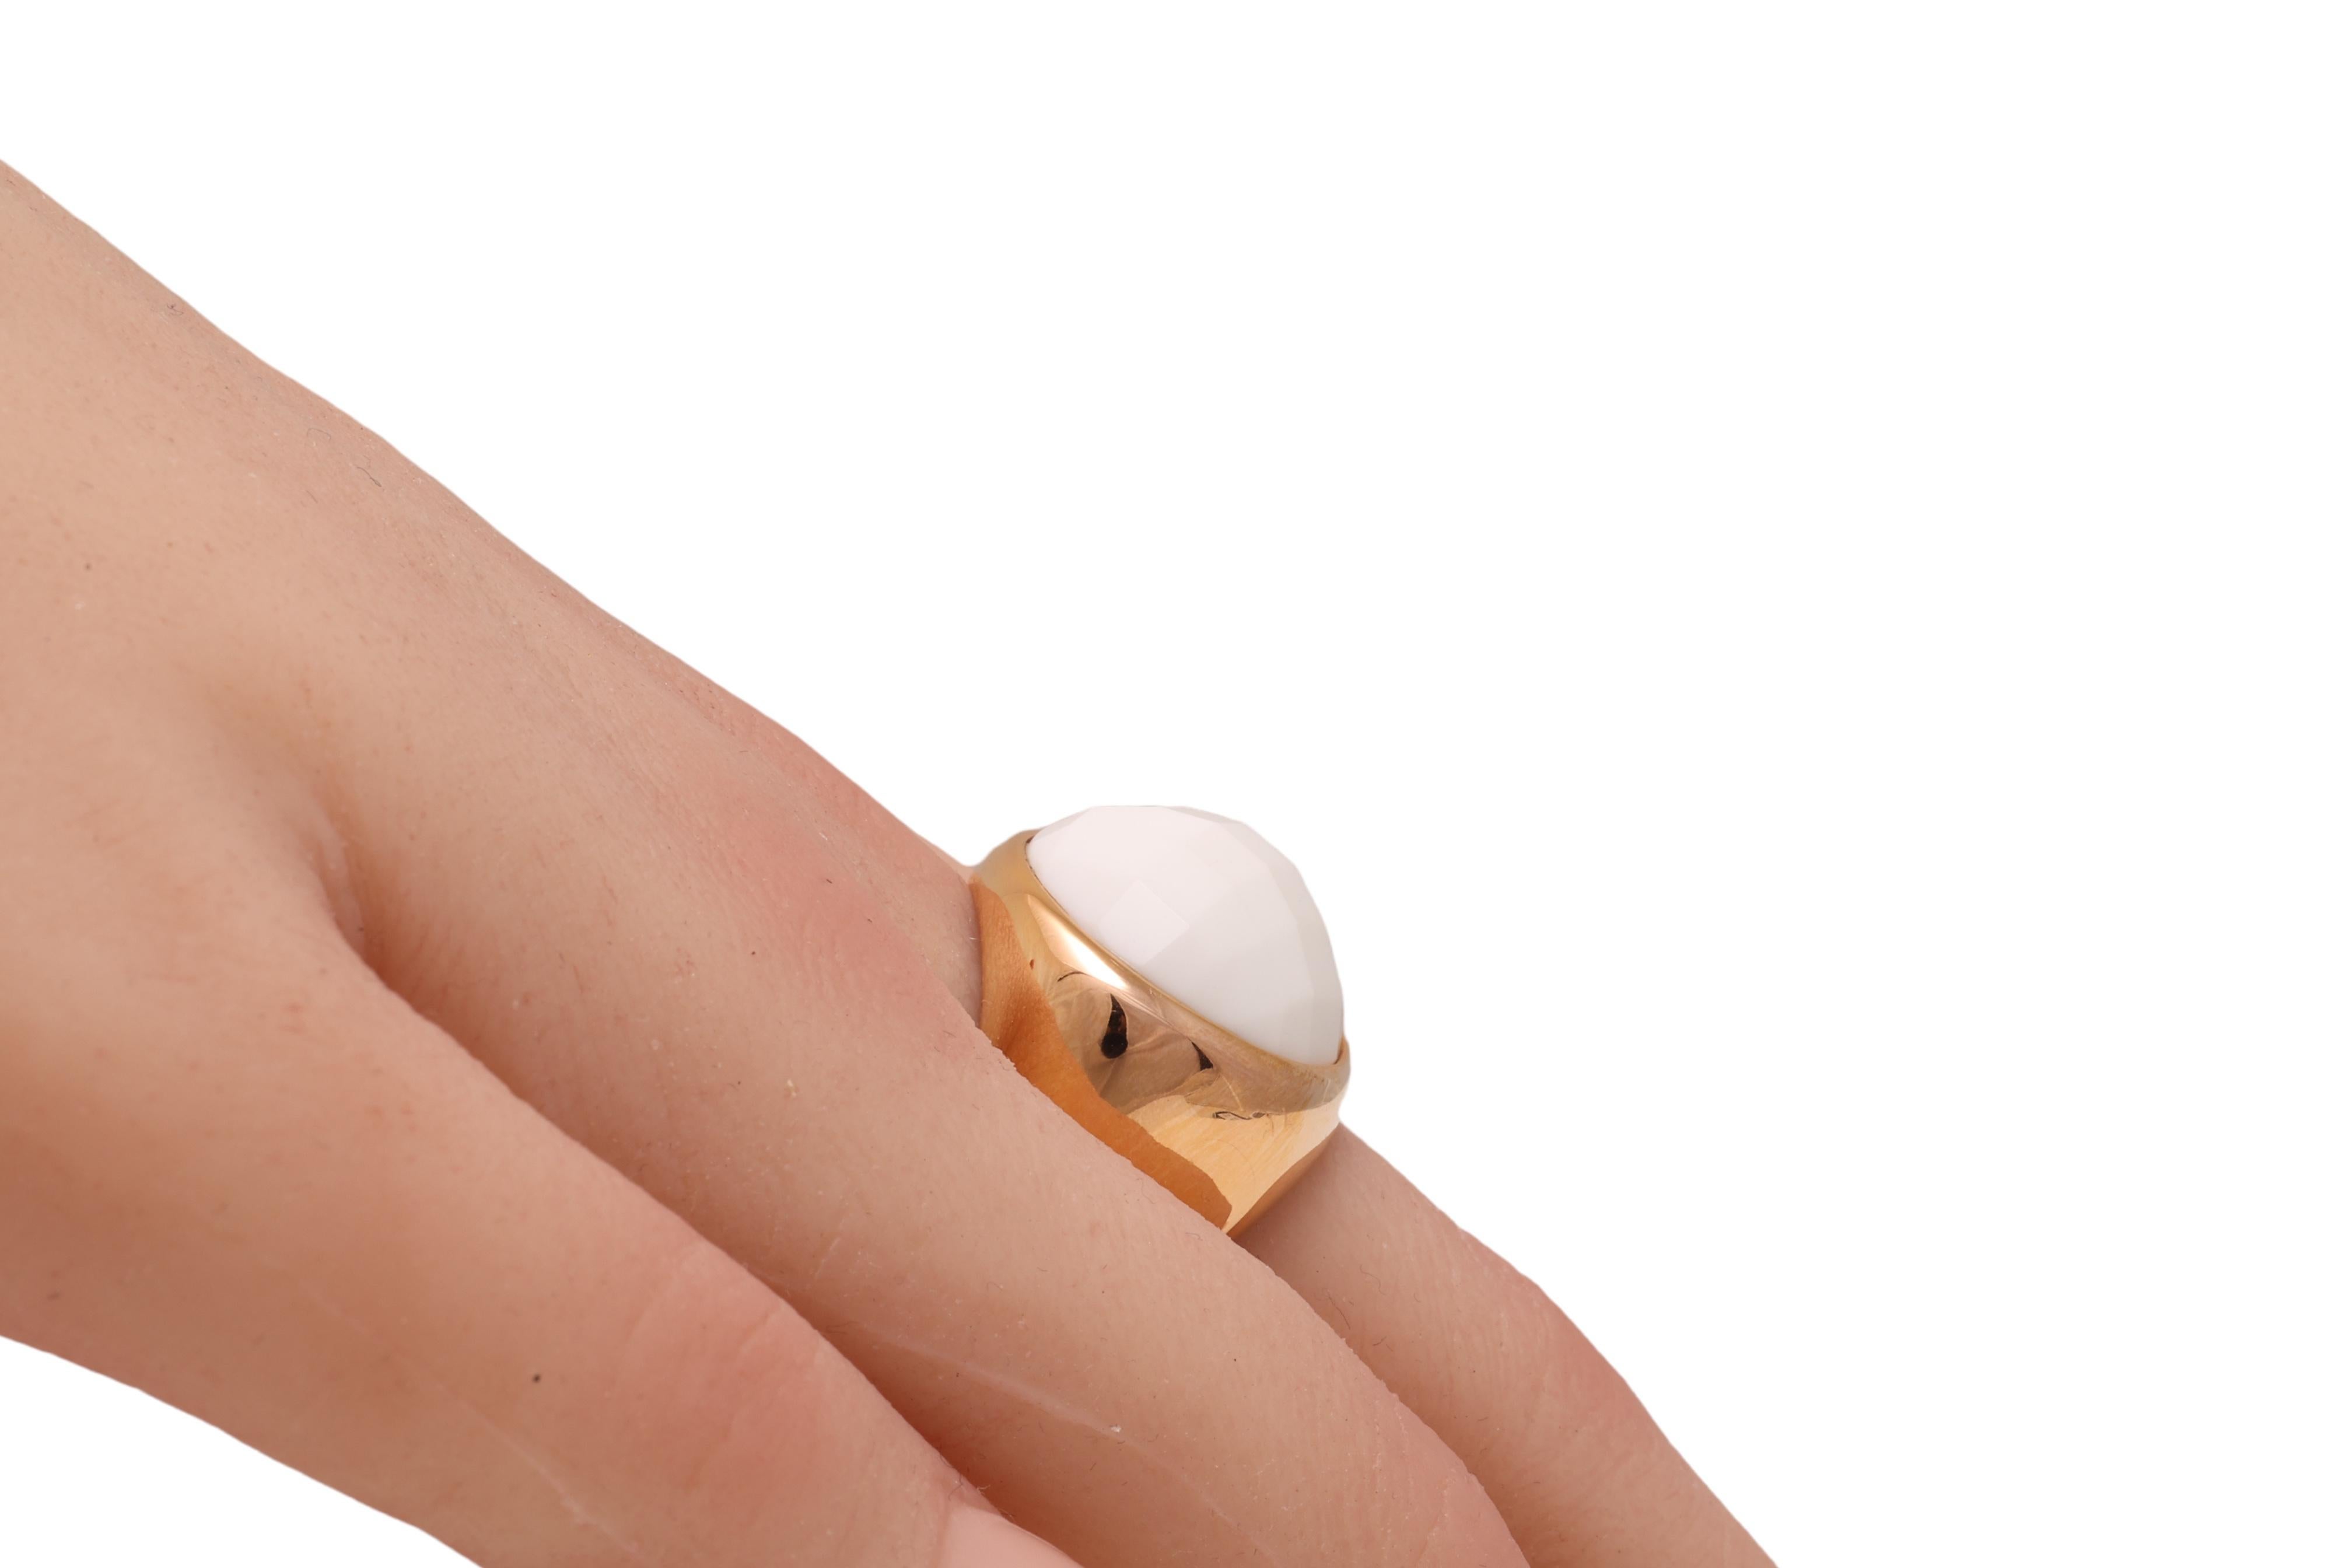 18kt. Pink Gold Ring With Round Faceted White Onyx Stone  For Sale 2